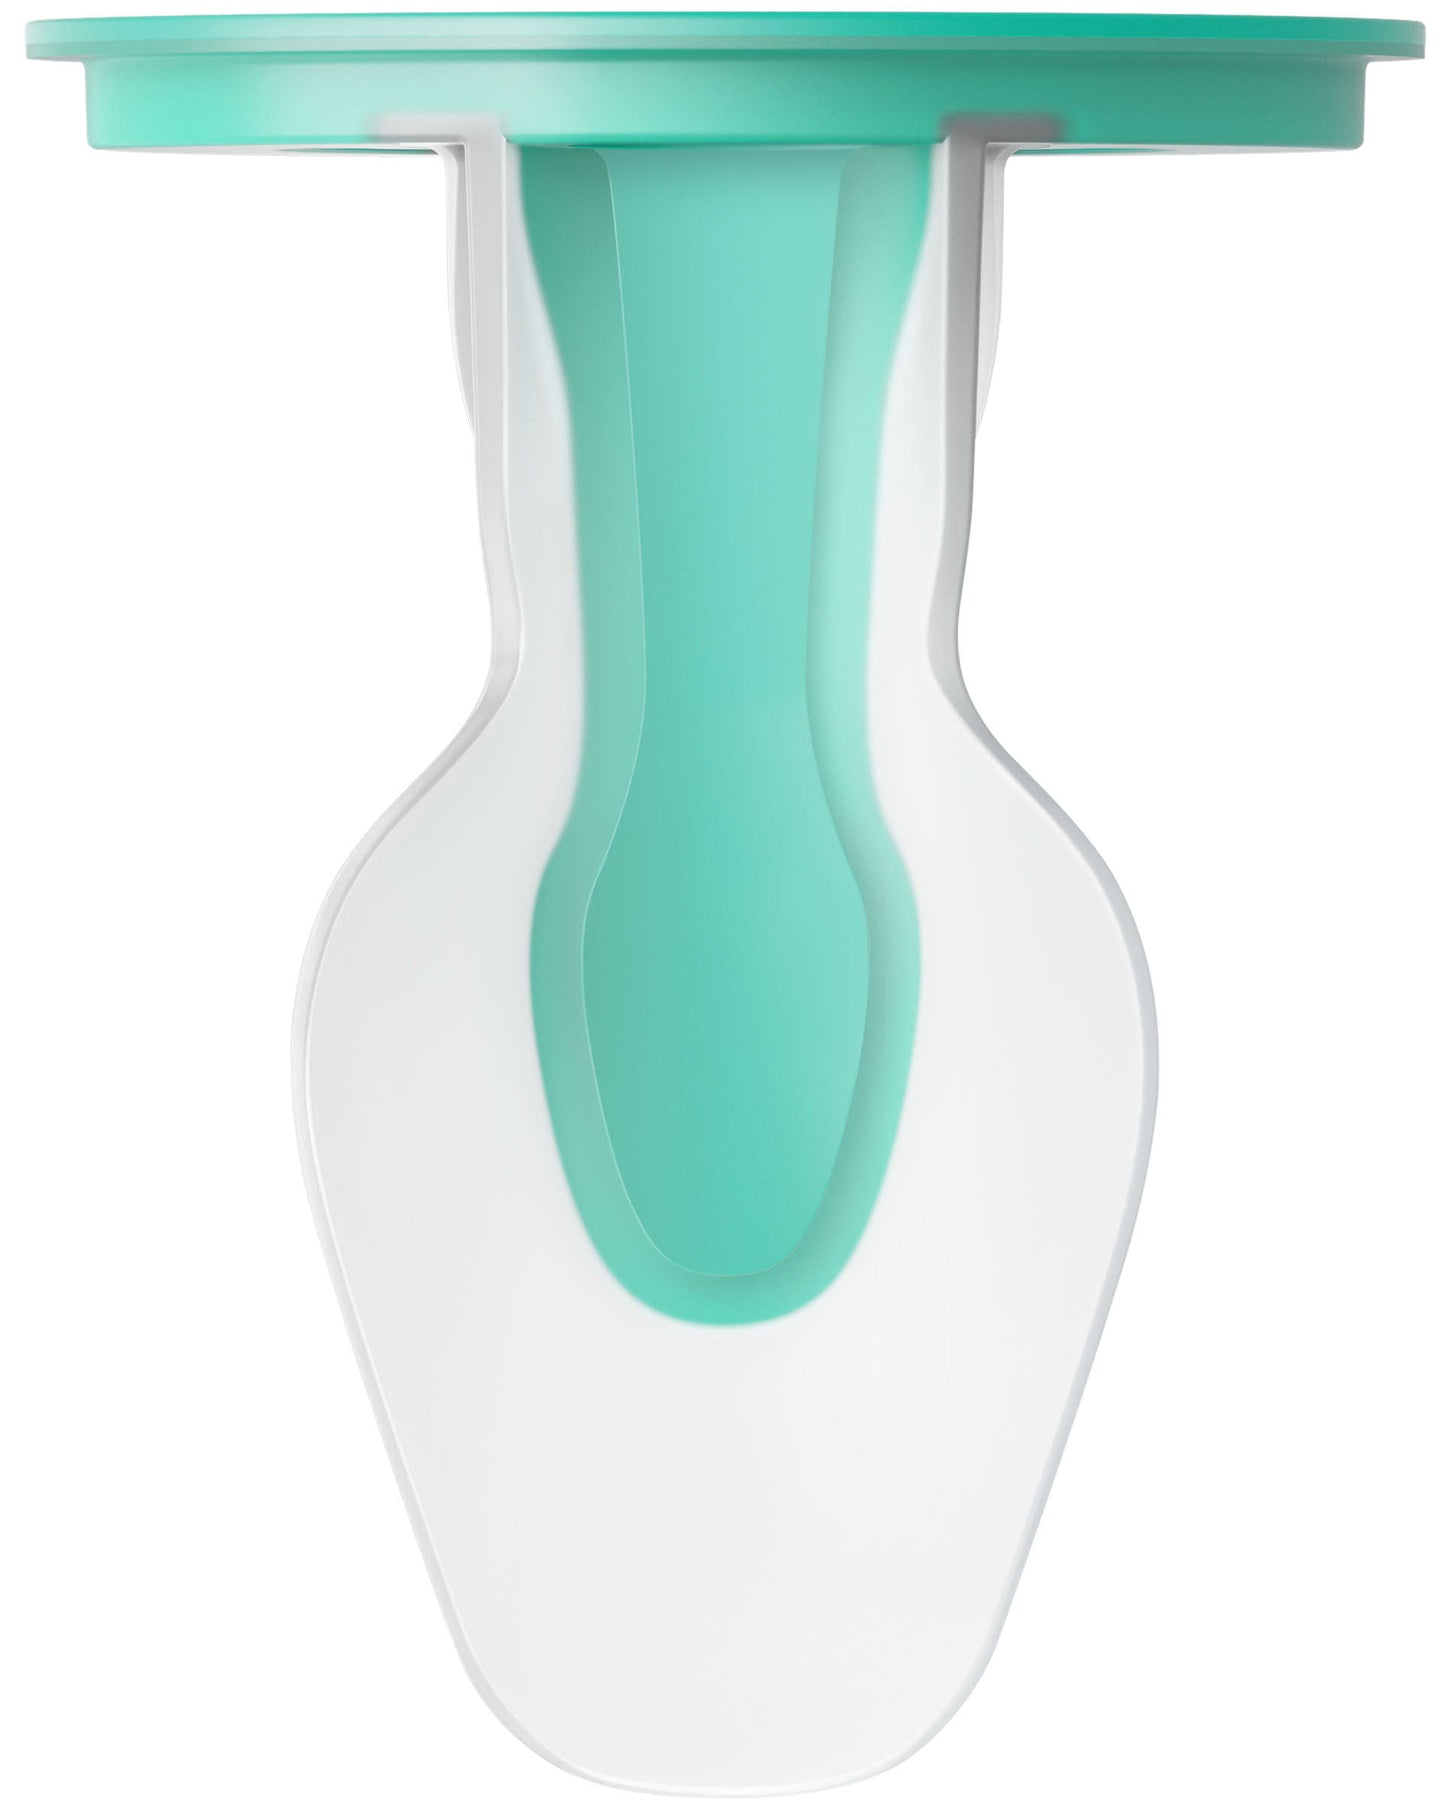 Philips Avent Natural 3.0 Feeding Bottle with Airfree Vent - 125ml